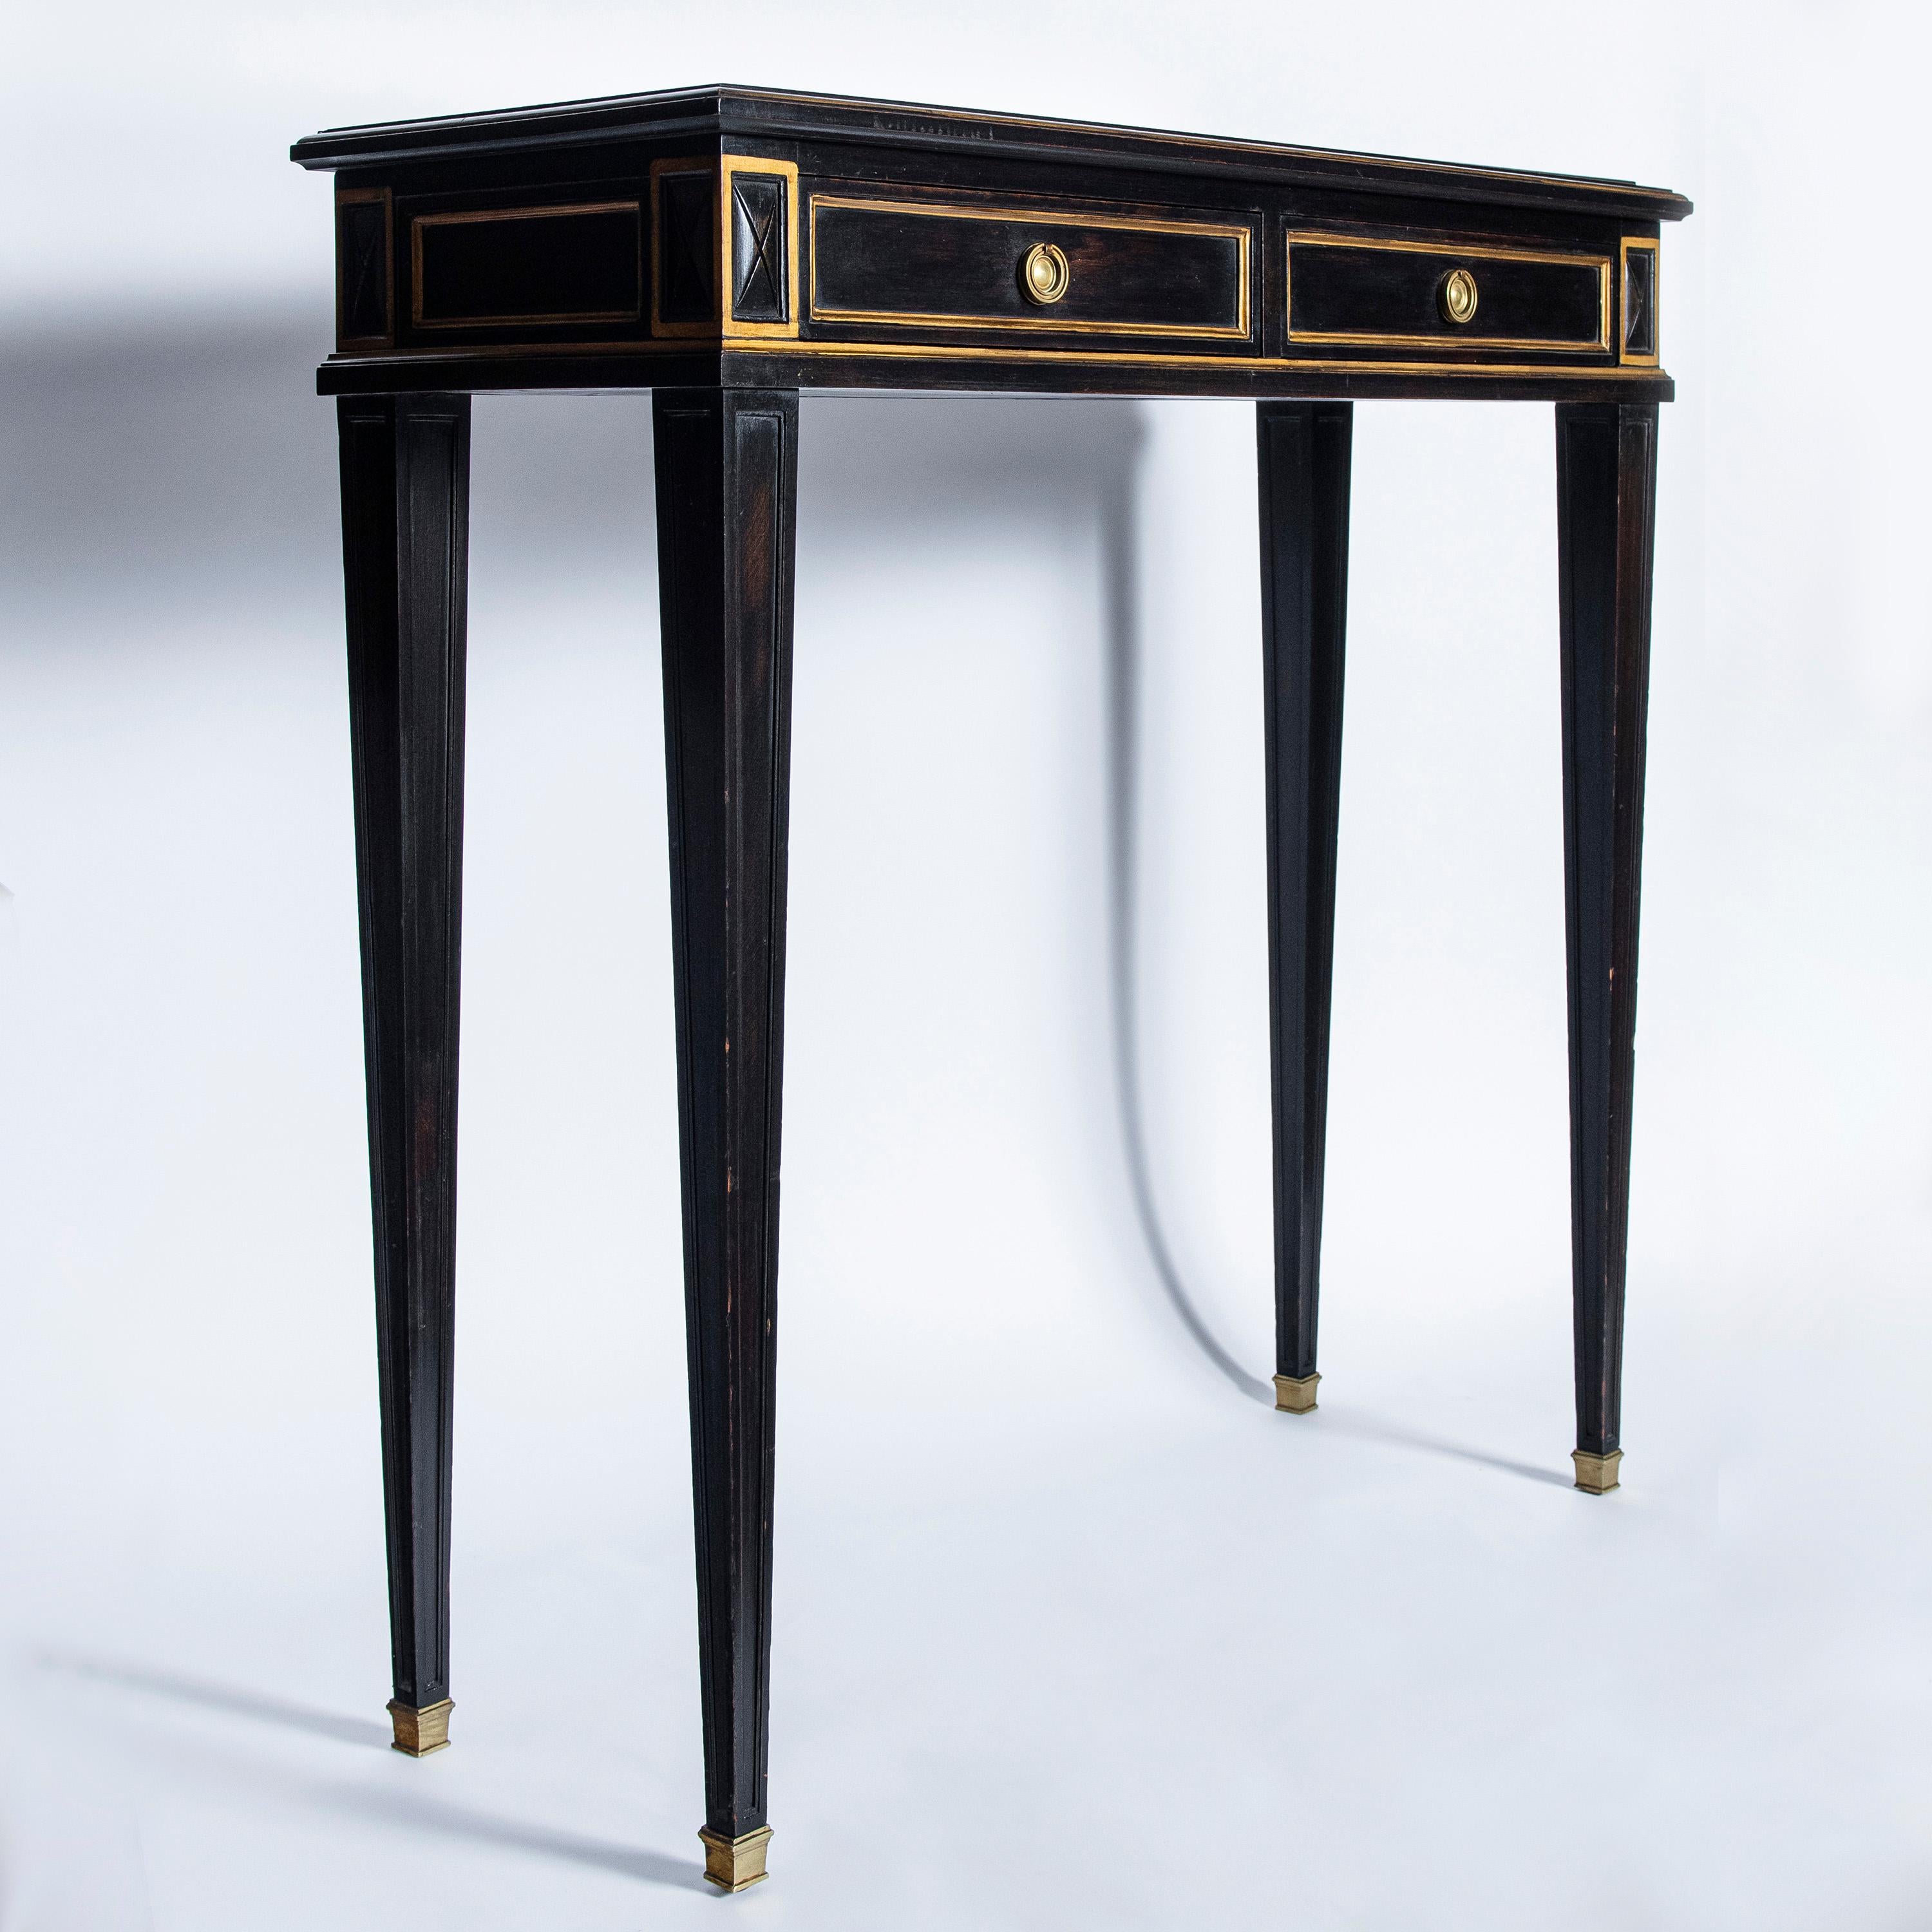 Patinated wood and bronze console with gold leaf glass, France, circa 1950.
Attributed to Maison Jansen.